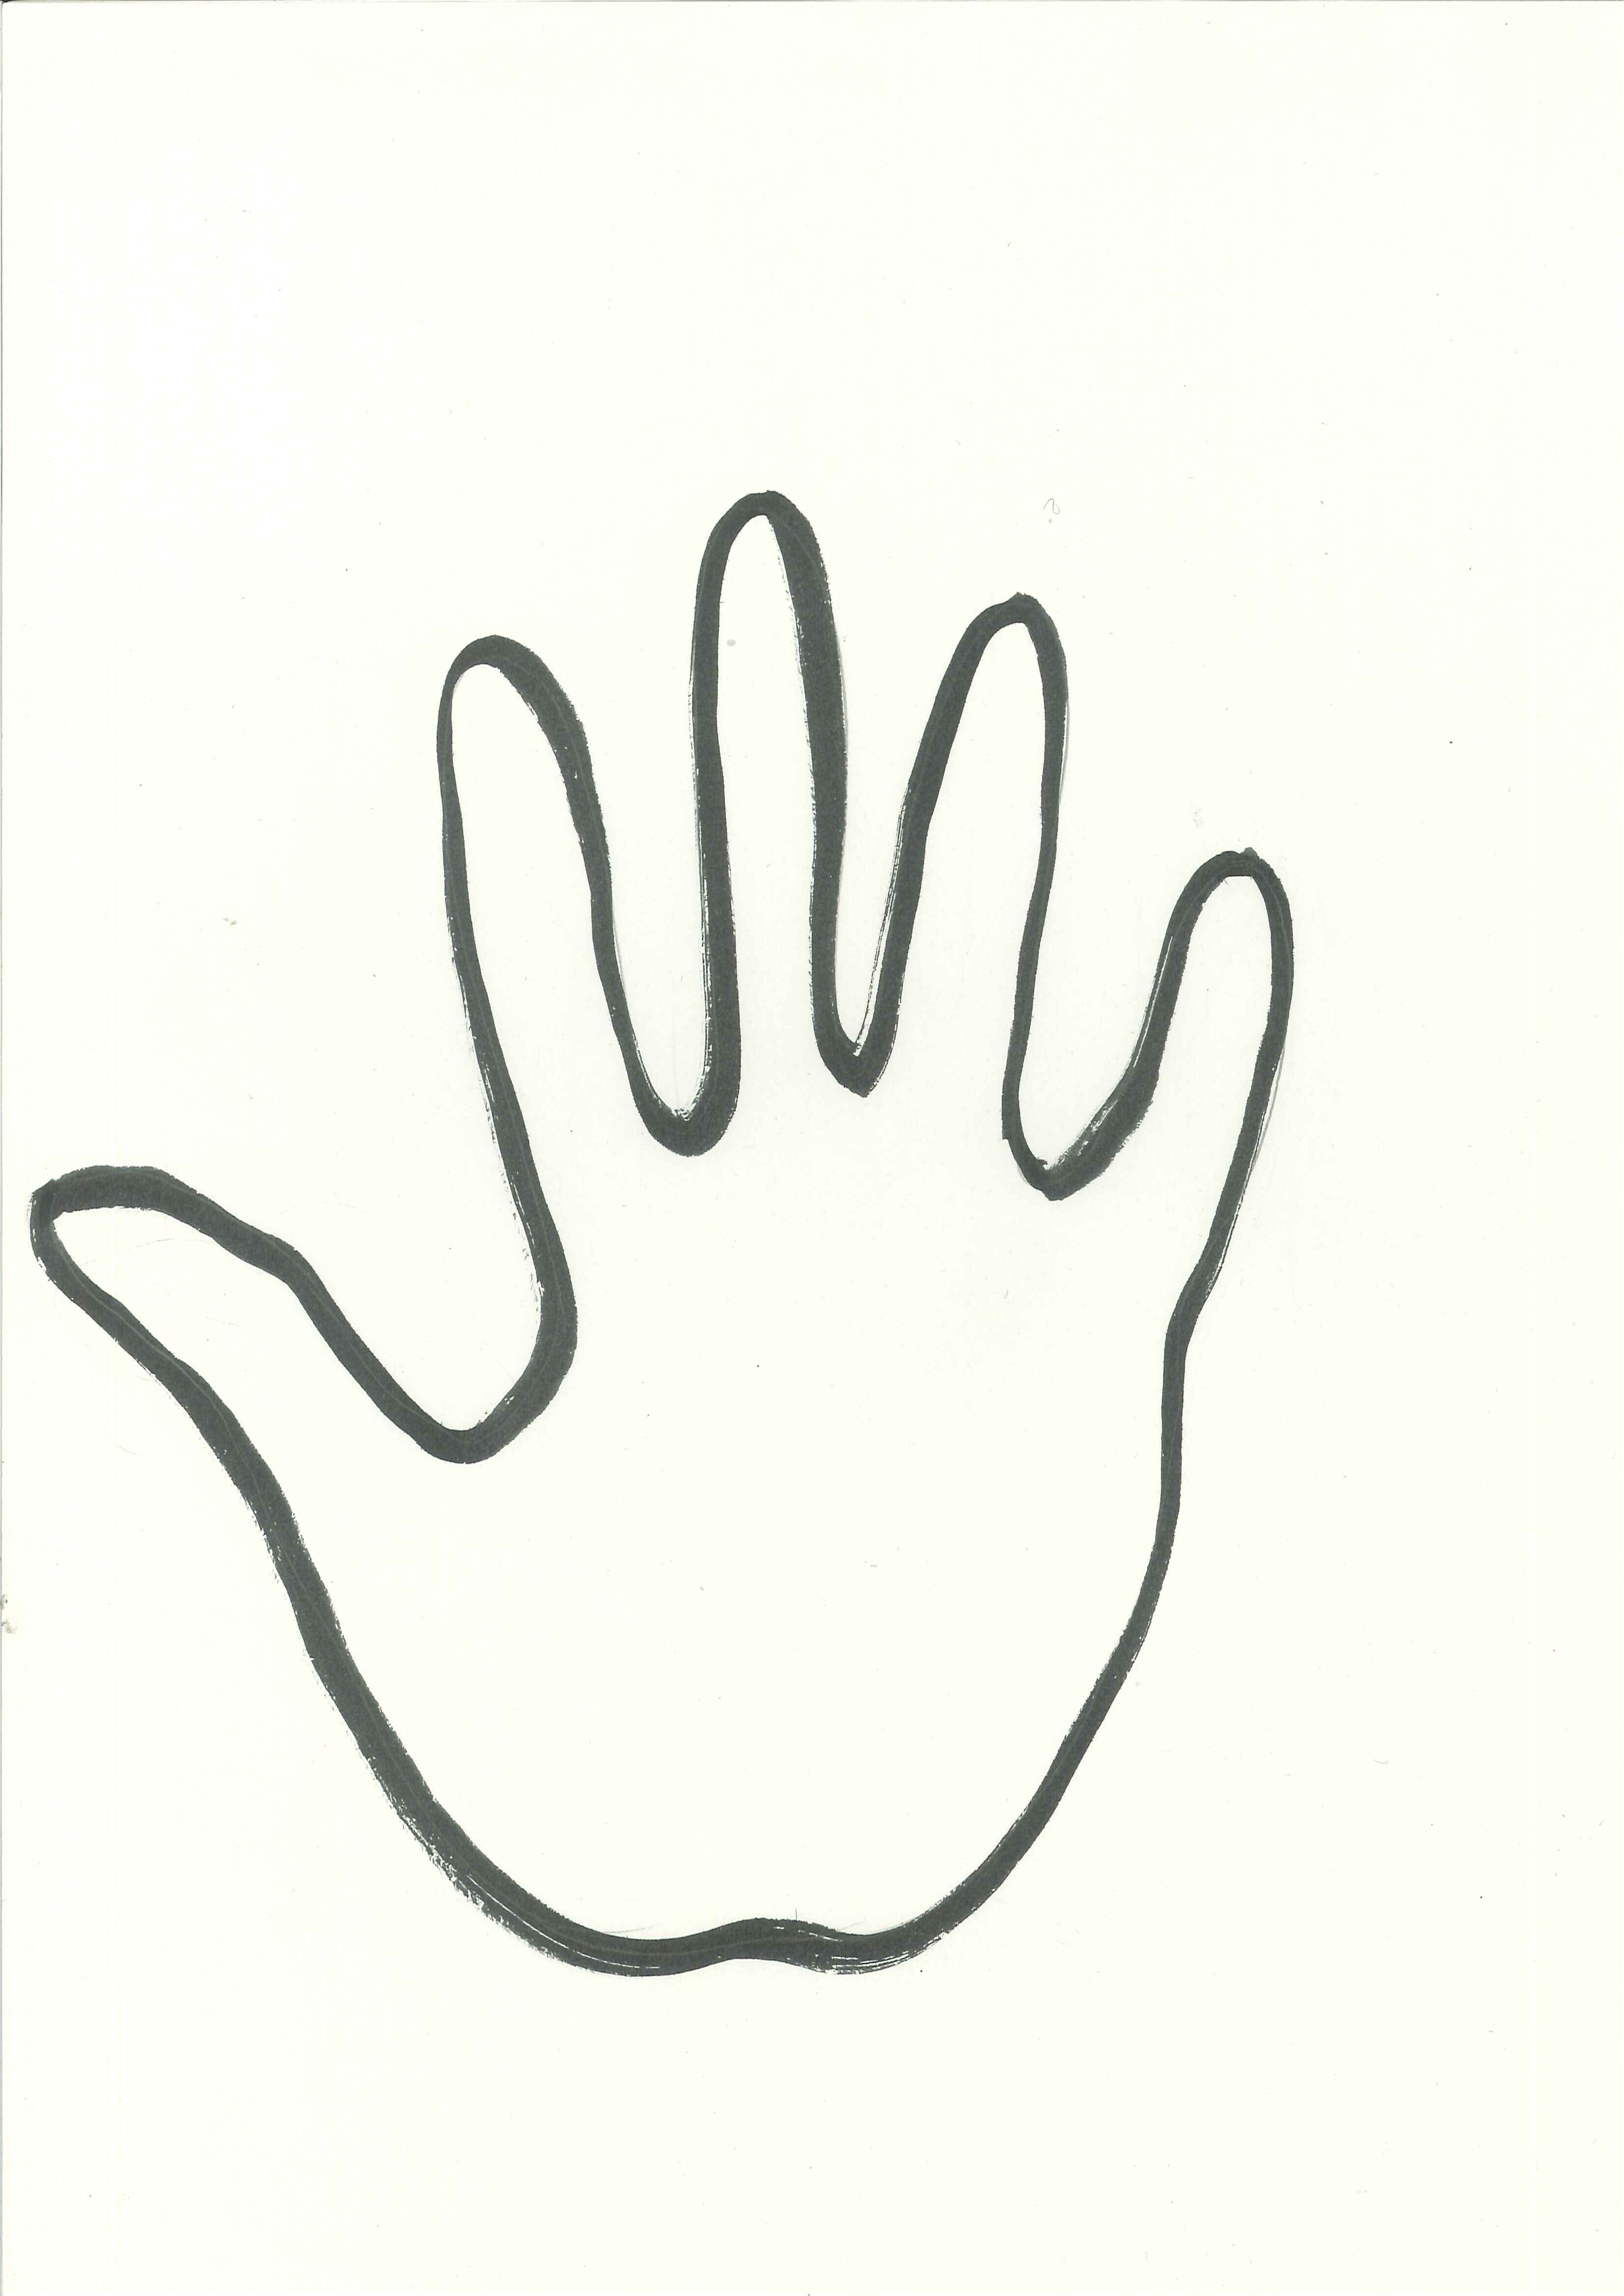 Free Outline Of Hand, Download Free Outline Of Hand png images, Free